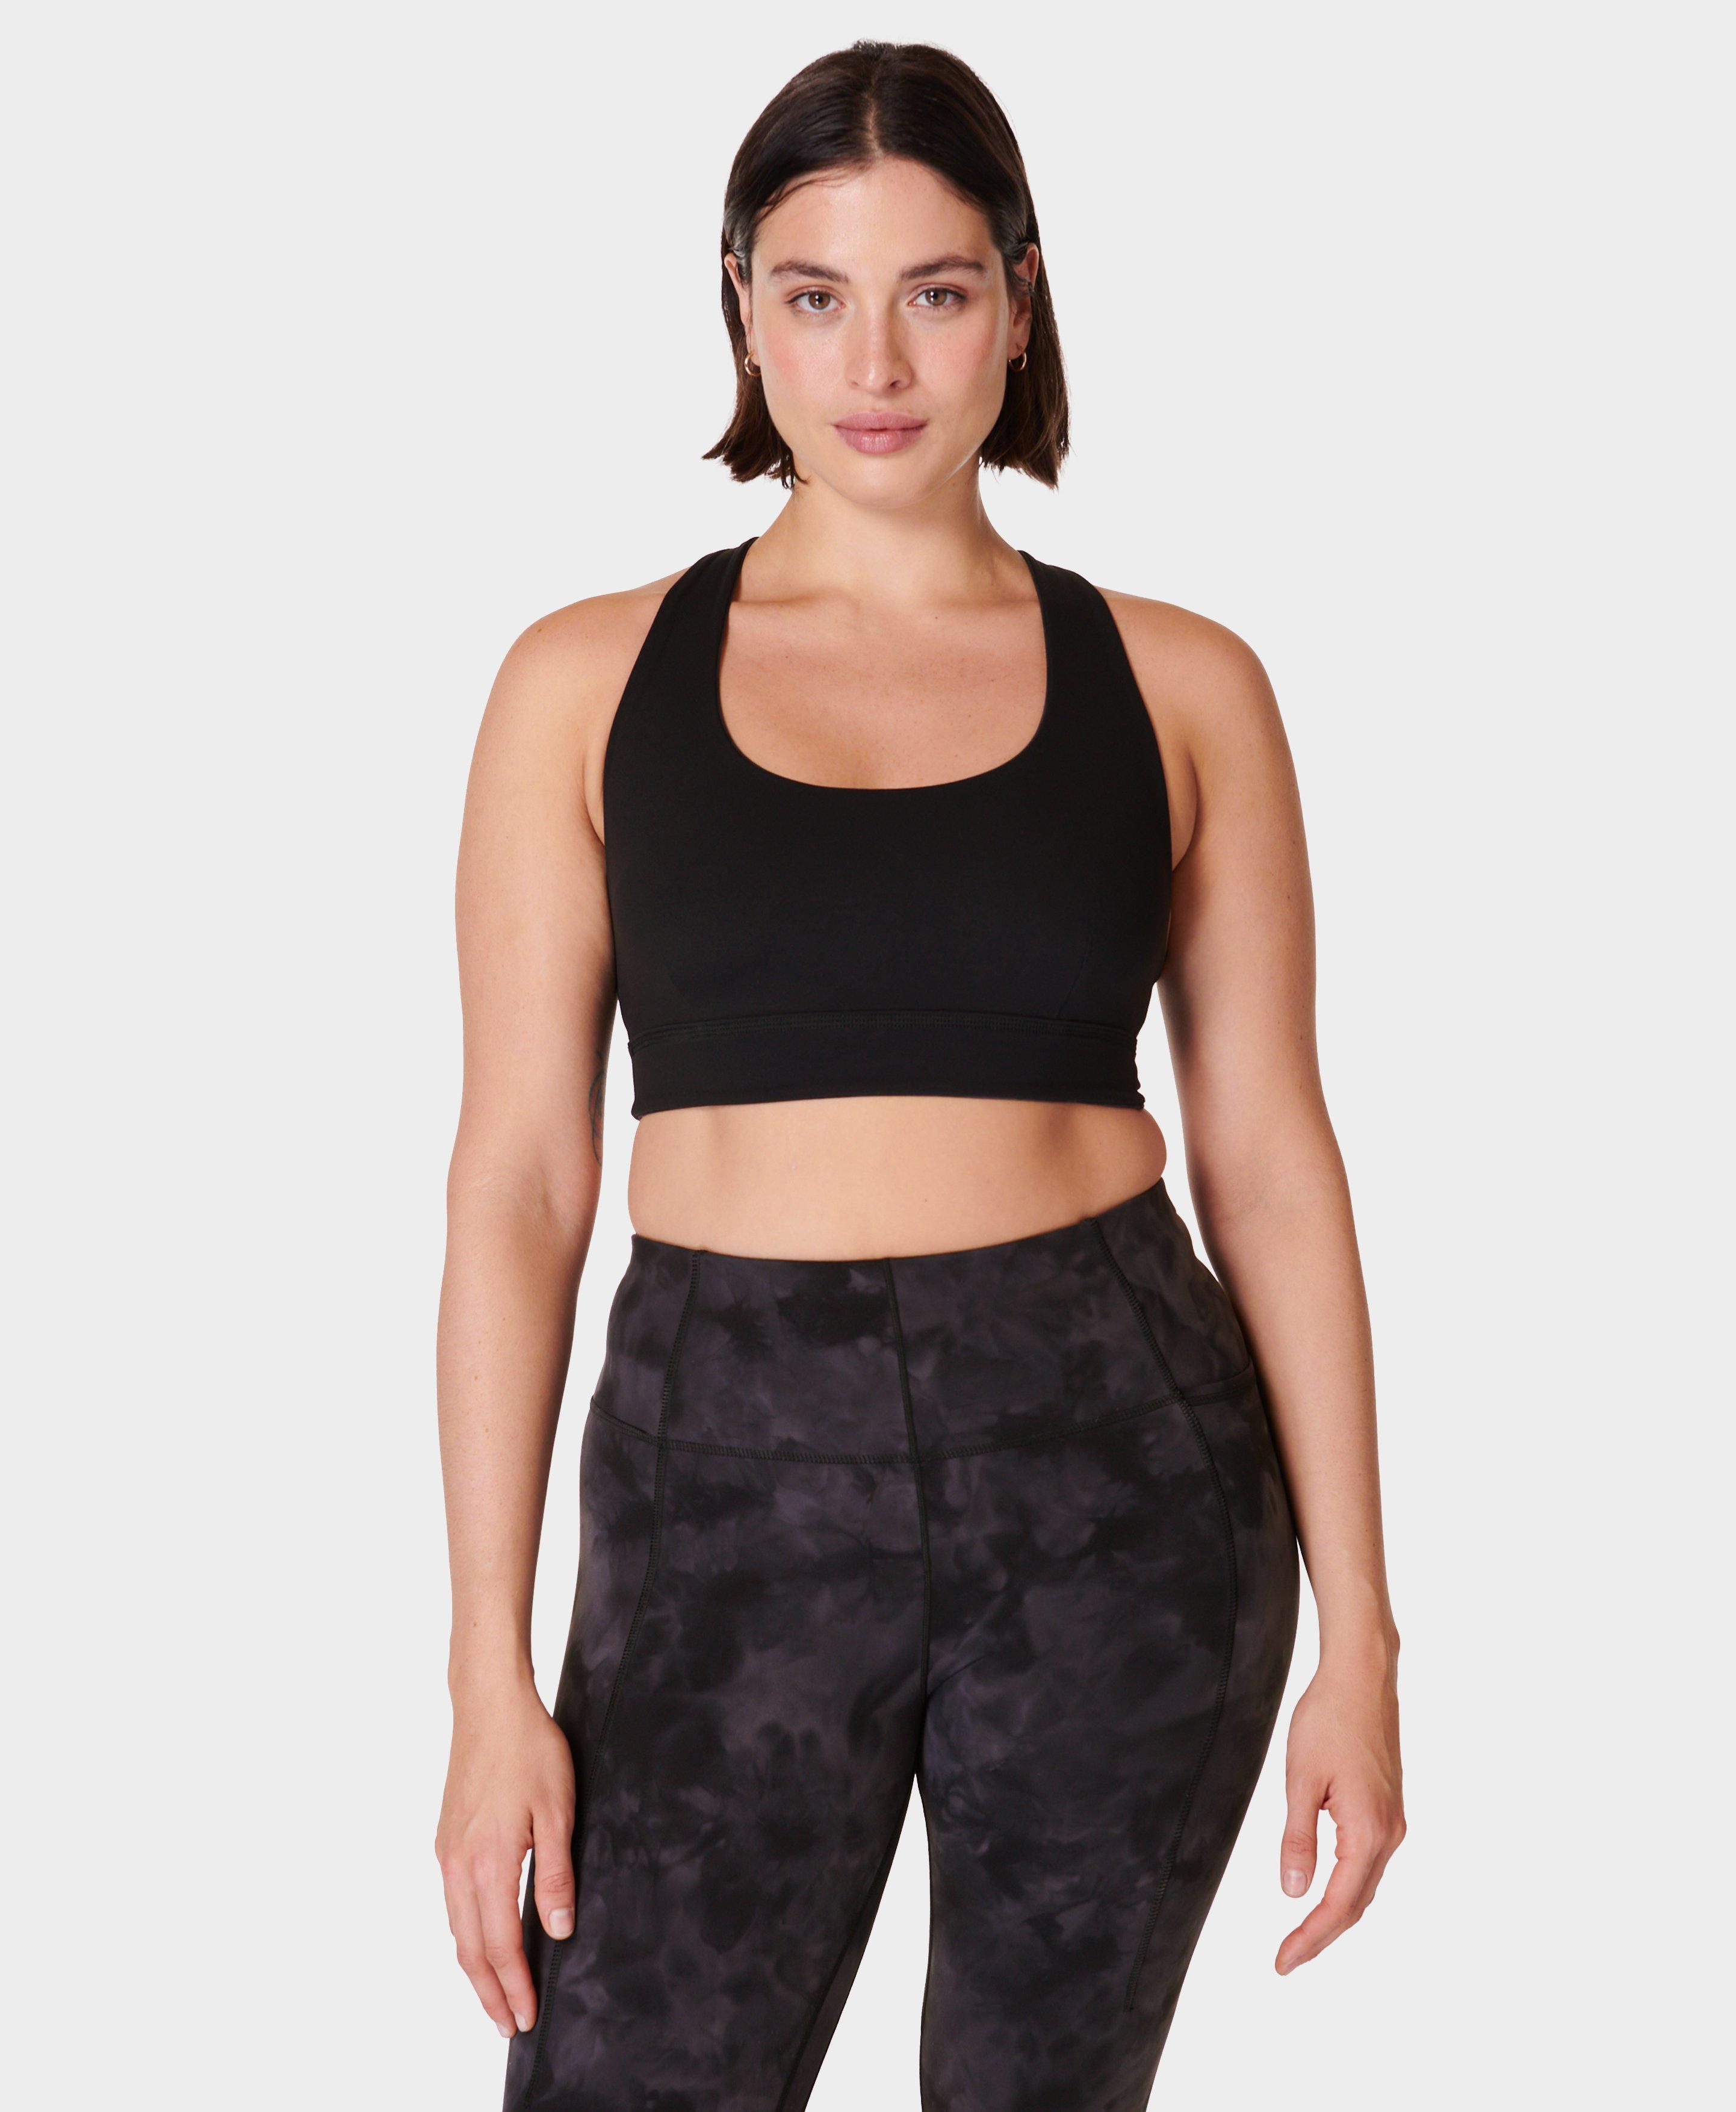 Sweaty Betty Brahma Yoga Bra, Small Bust? No Problem. These 10 Comfortable  Sports Bras Are For You